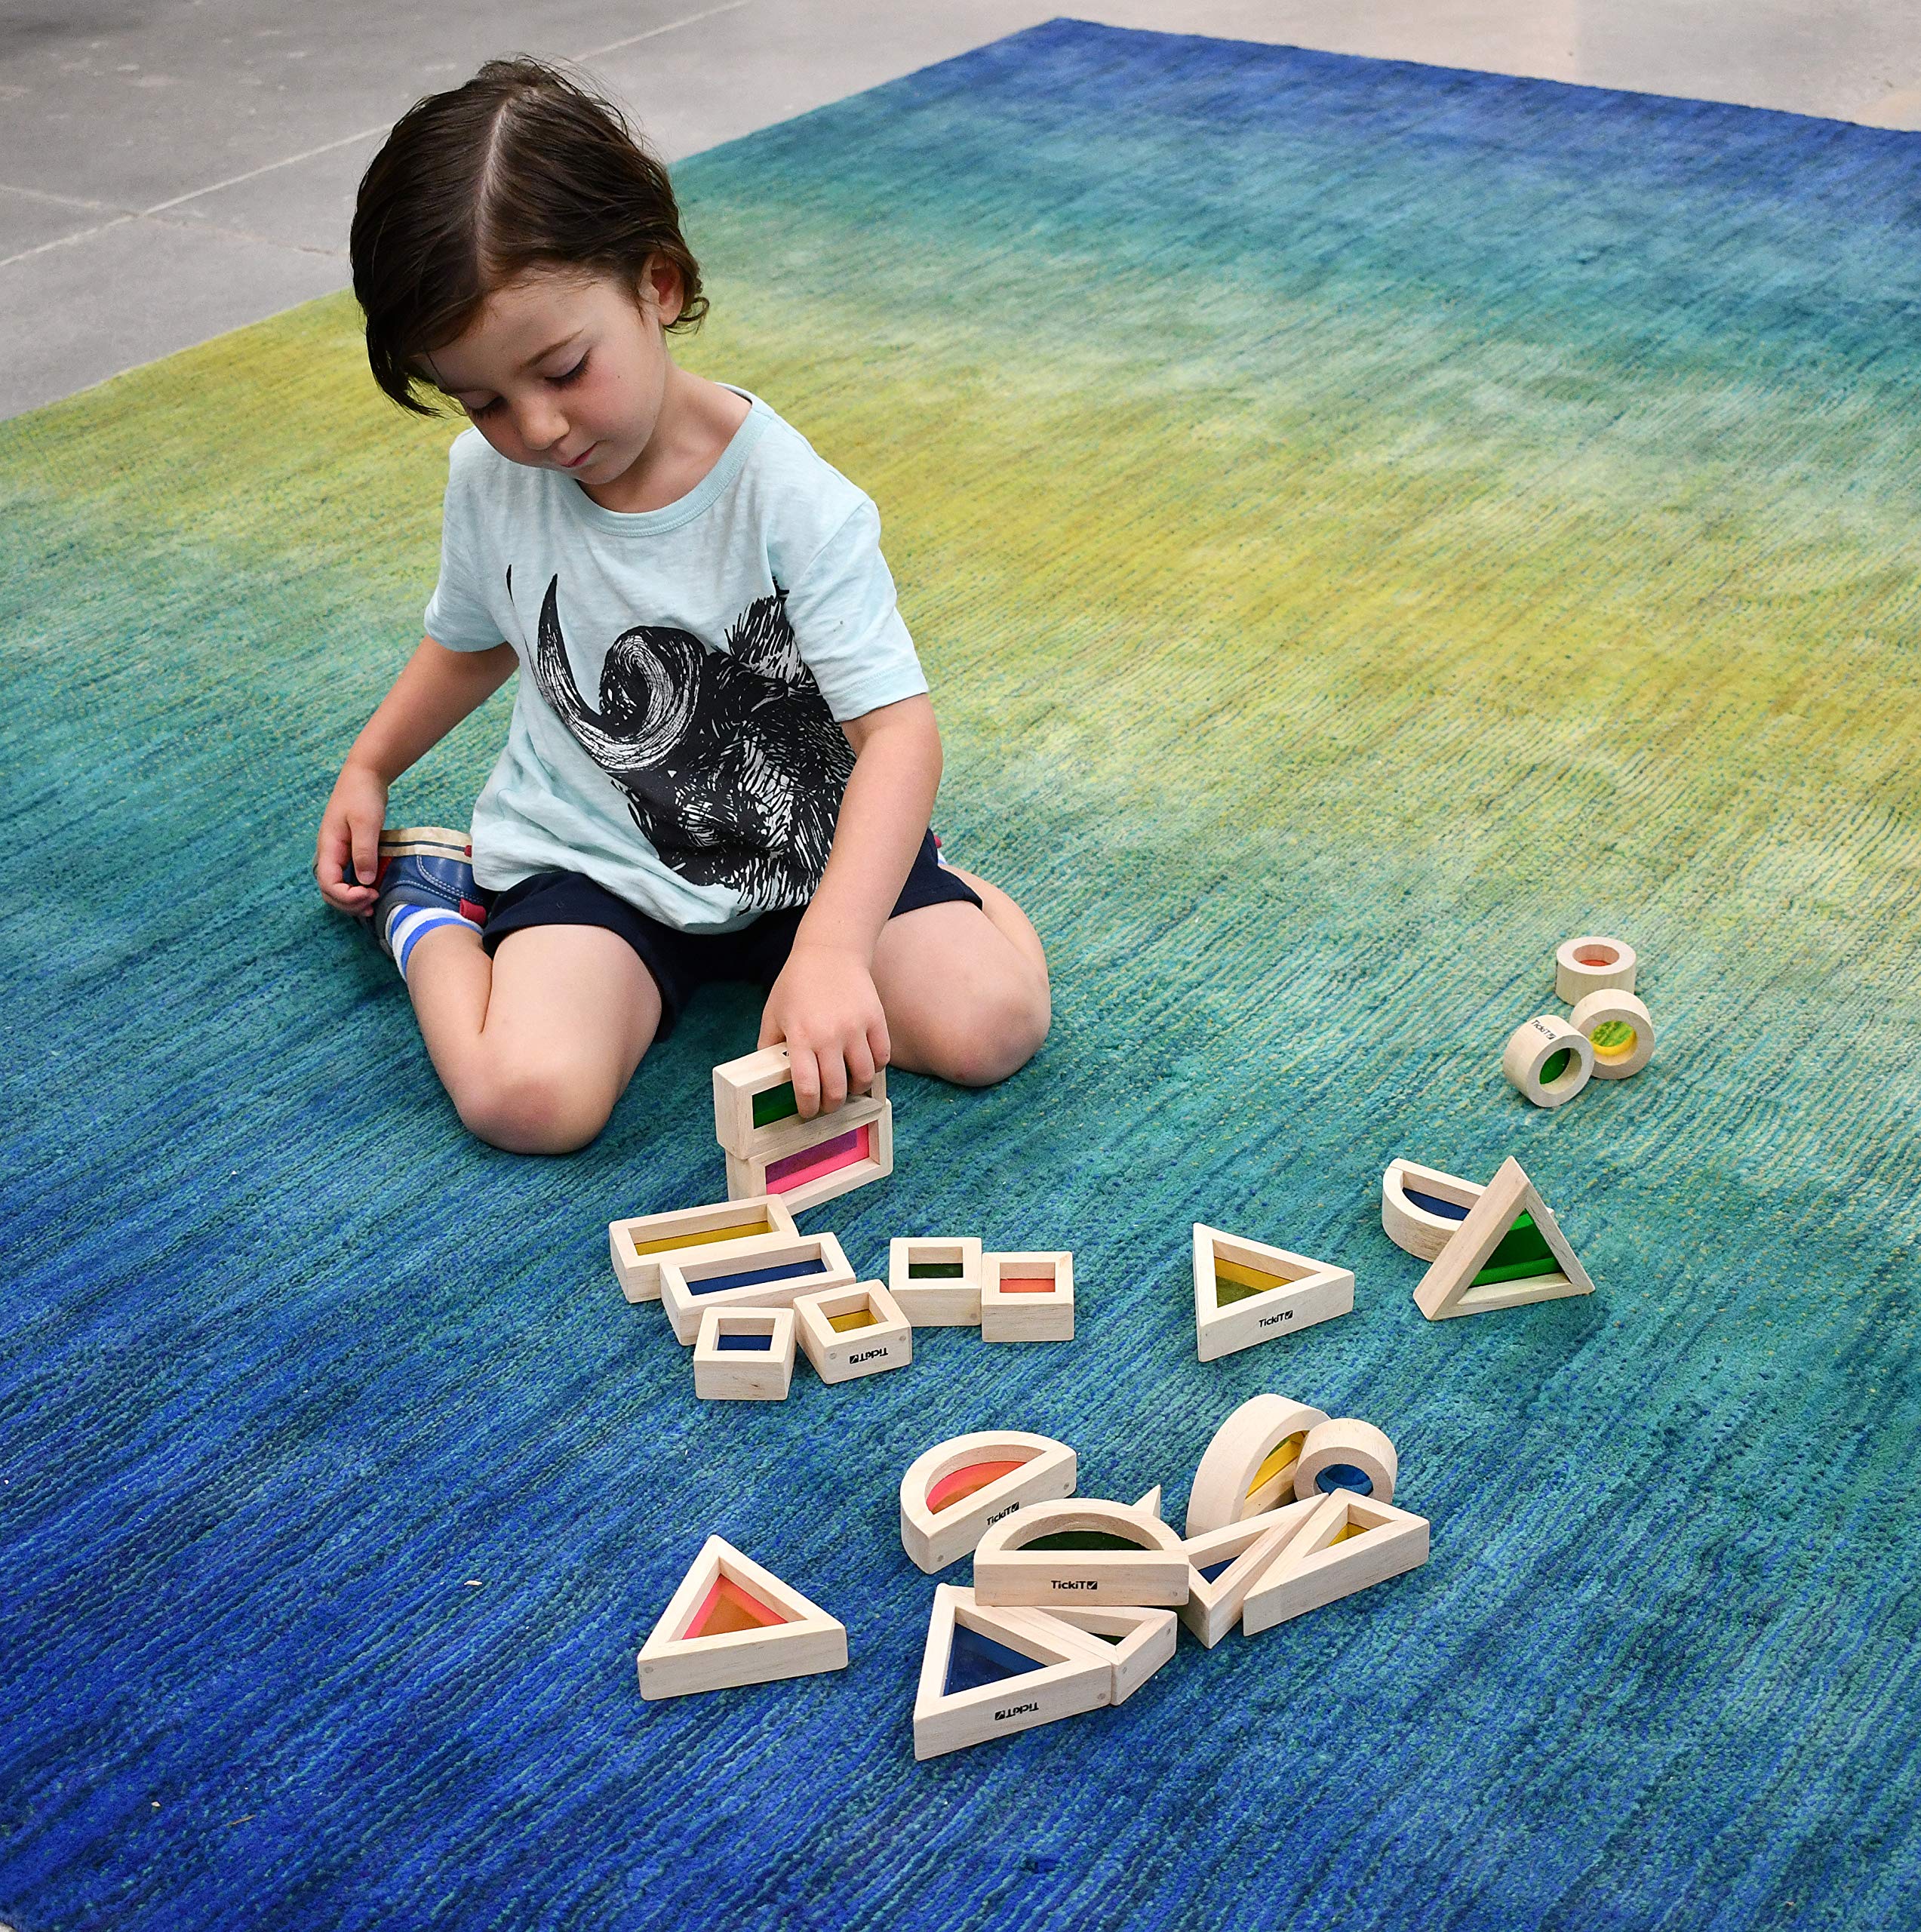 TickiT Rainbow Blocks - Set of 24 - Sensory Blocks for Toddlers Aged 12M+ - Colorful Montessori Stacking Shapes - First Building Blocks